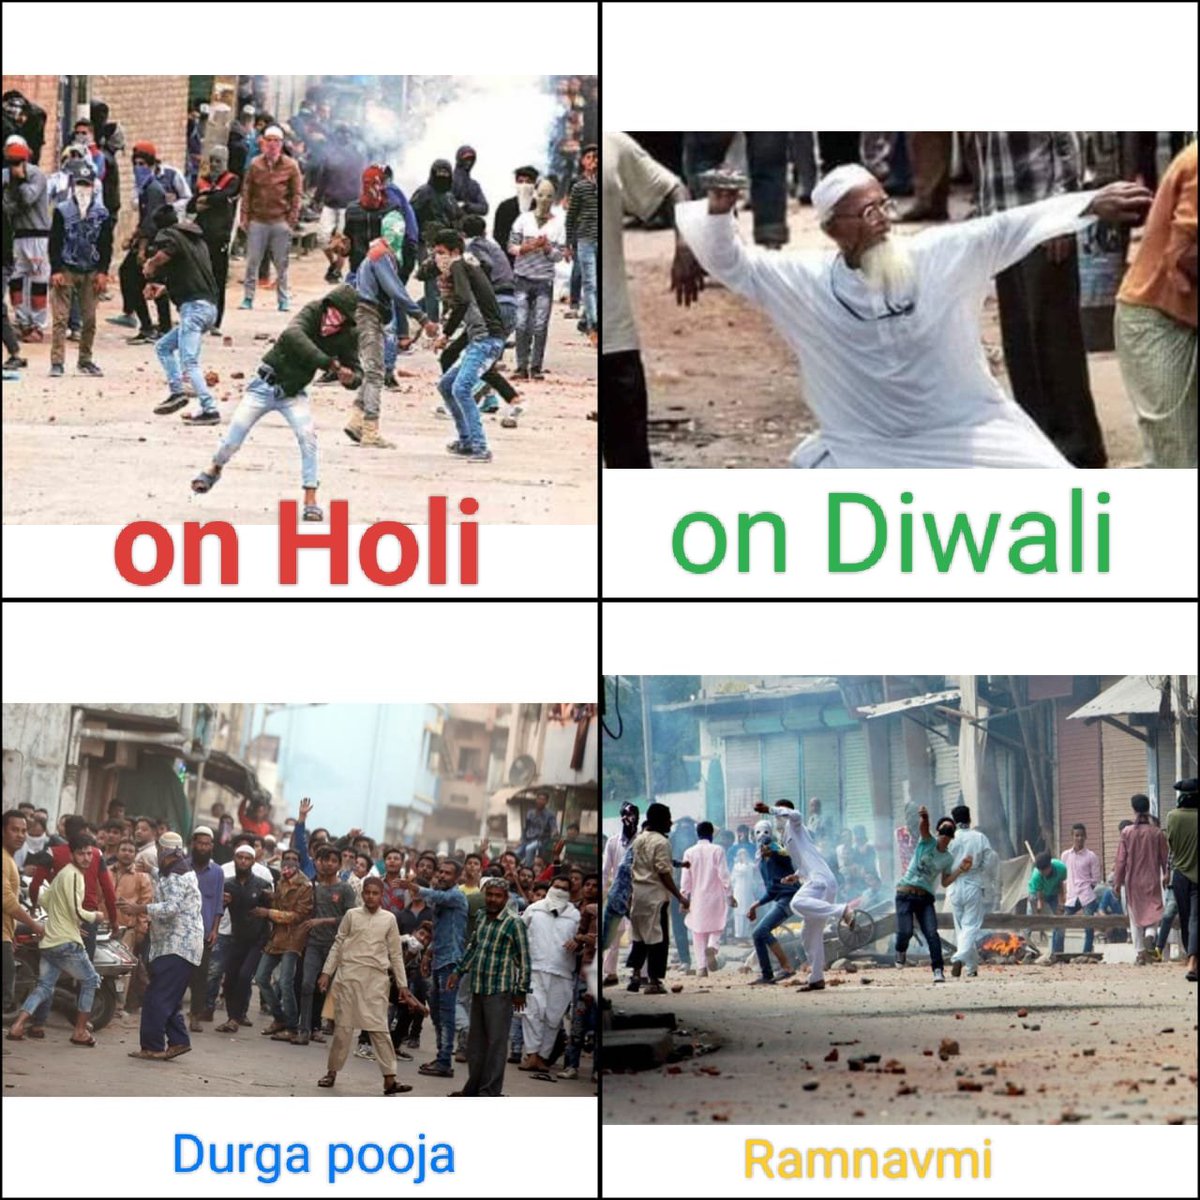 Again stones pelted on Ramnavmi proccession in Bengal..
Pissfull Cult..🤲